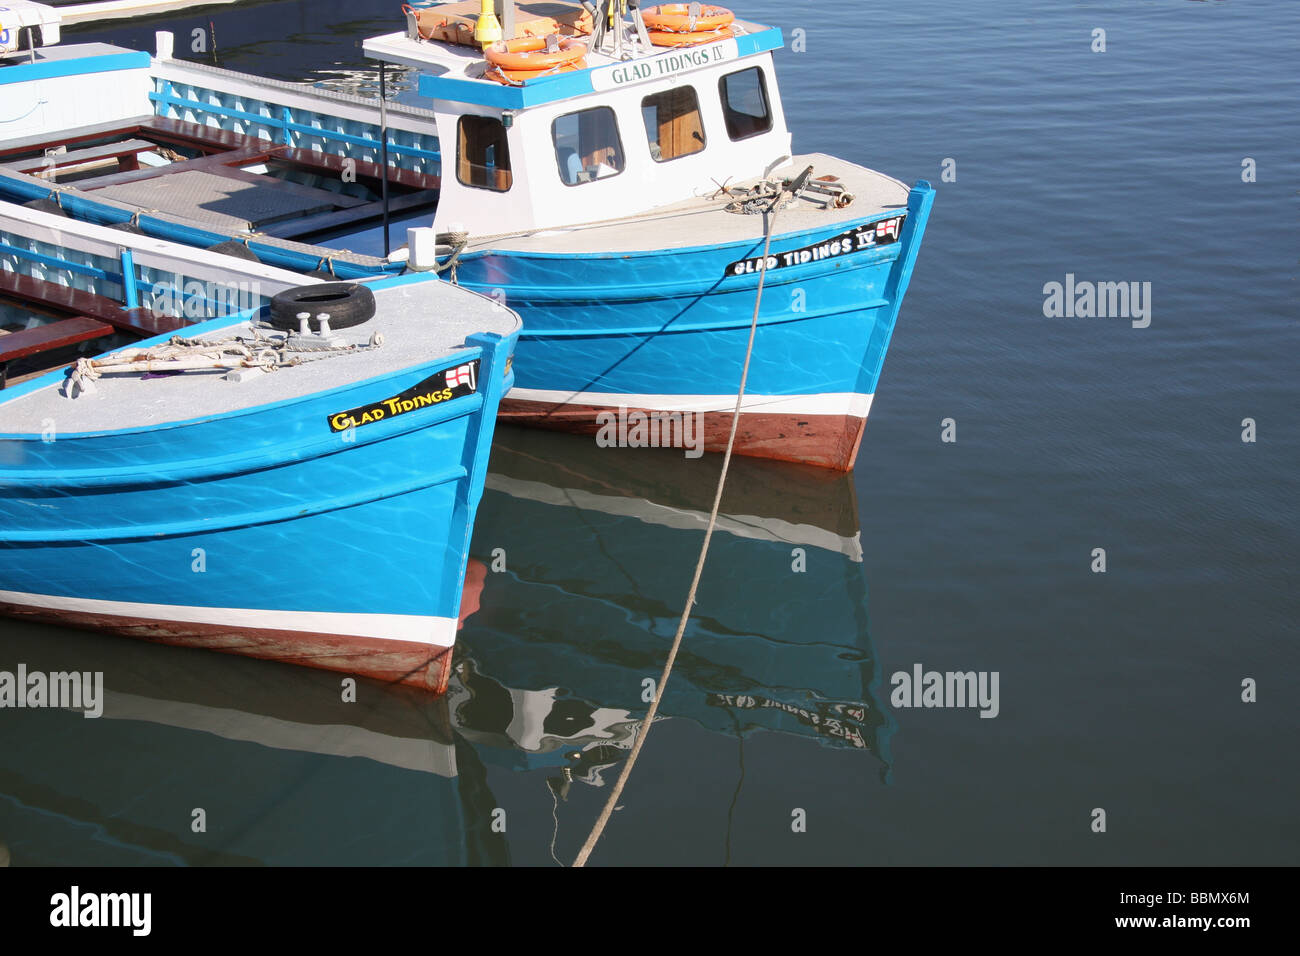 Tourist boats, used for visiting Farne Islands, moored in harbour, Seahouses, Northumberland, Uk Stock Photo